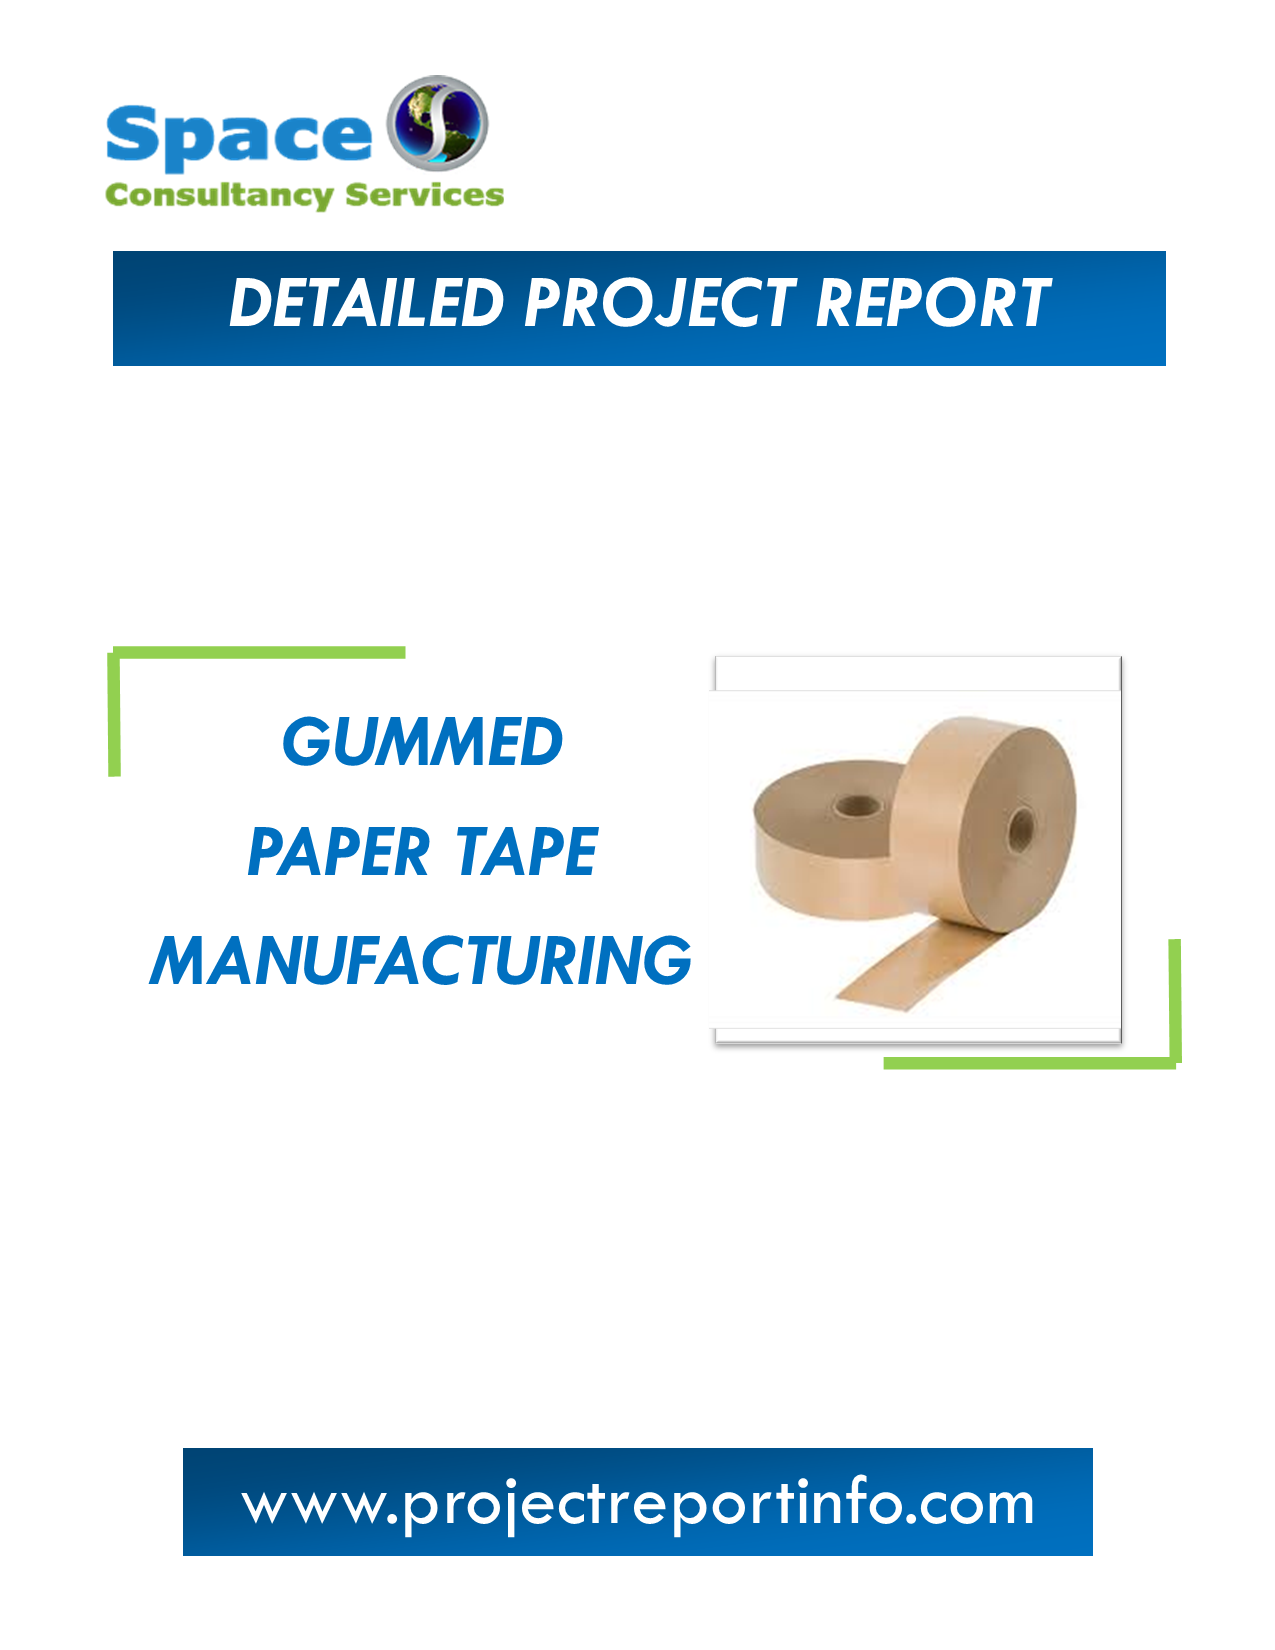 Project Report on Gummed Paper Tape Manufacturing